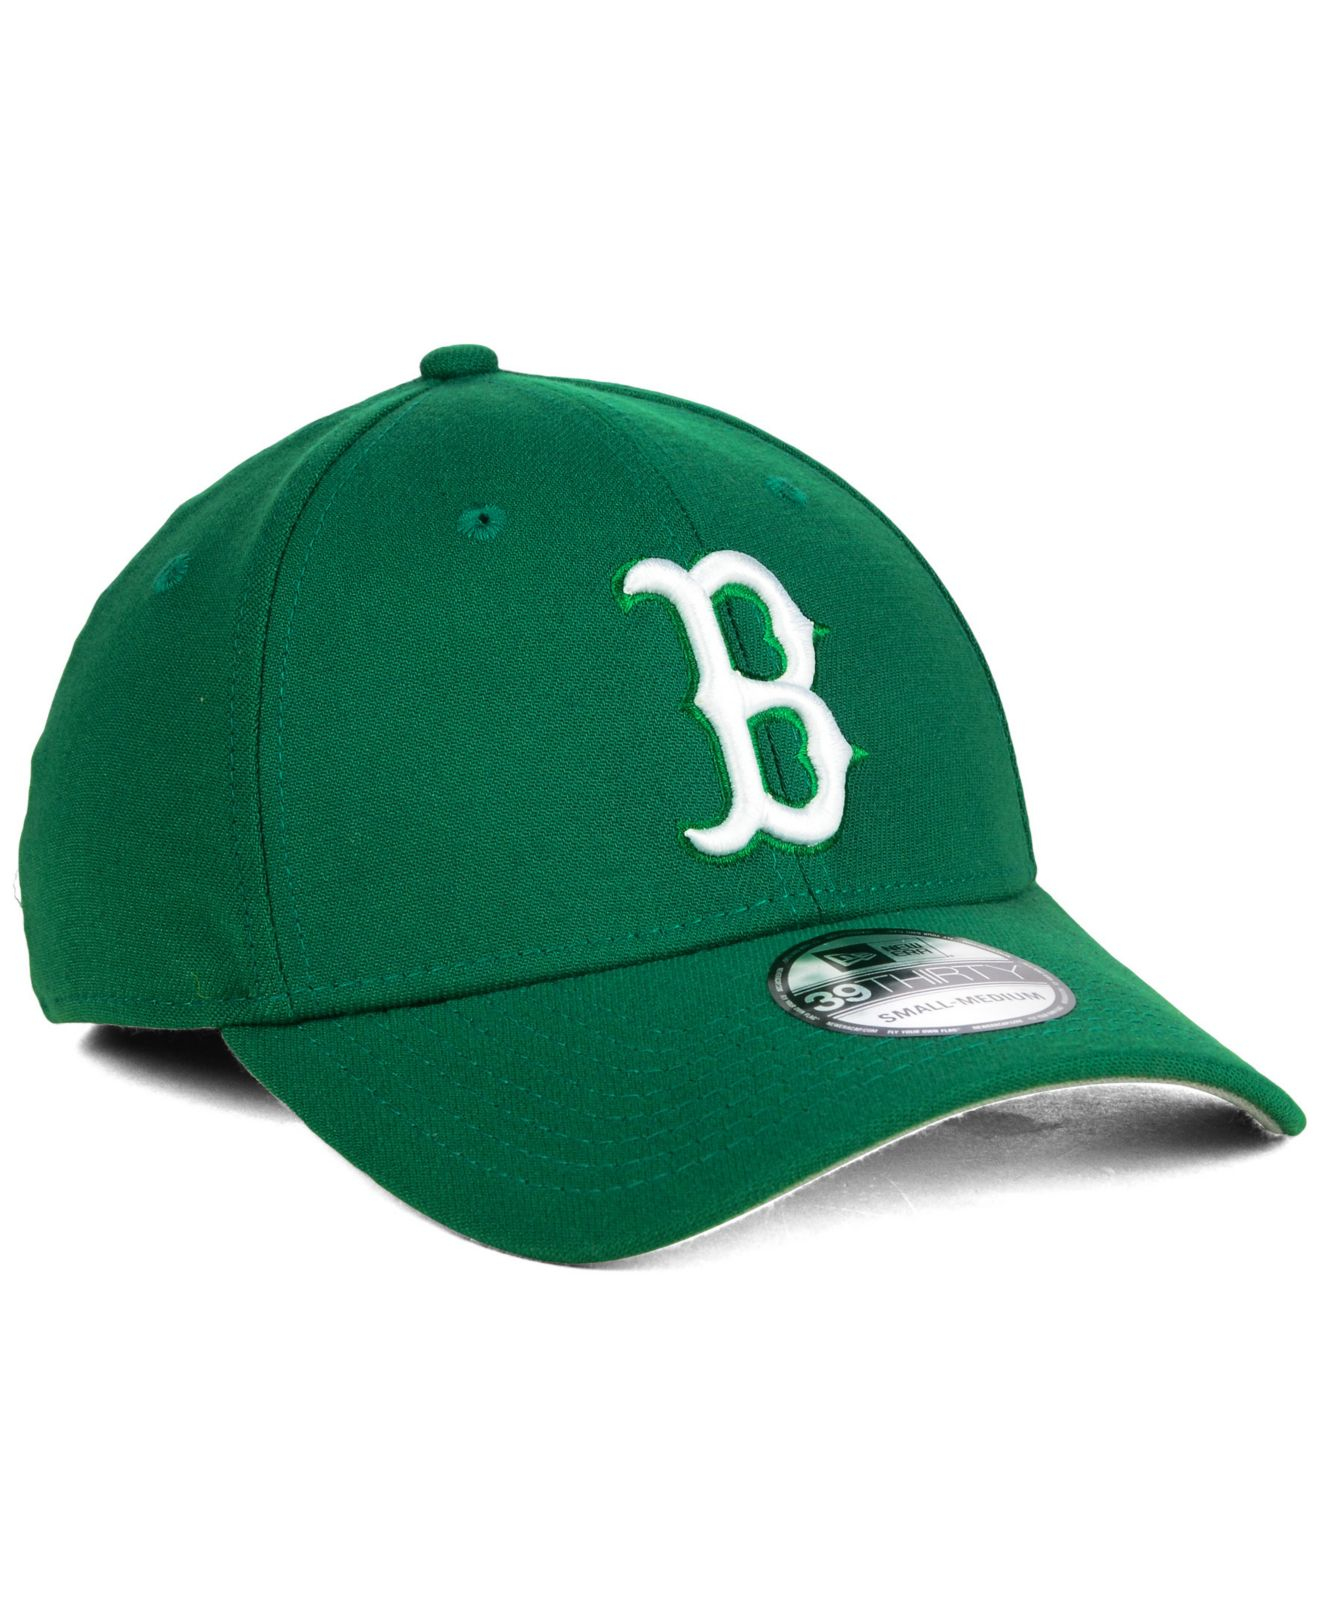 Red Sox Wearing Green Uniforms, Green Hats in Honor of St. Patrick's Day 